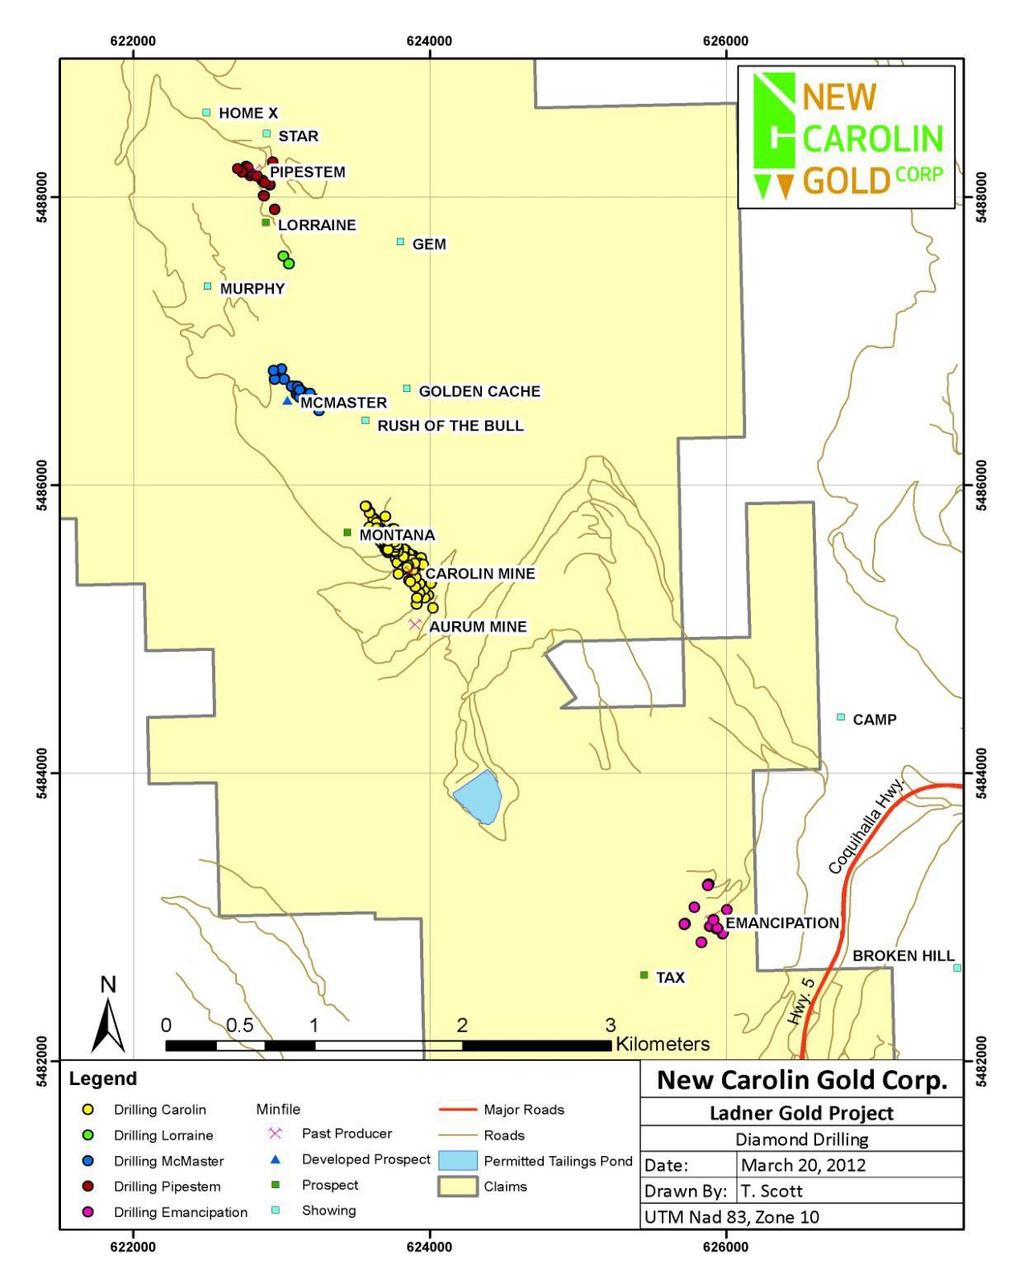 5 HISTORICAL MINES 24 KNOWN HIGH-GRADE GOLD OCCURRENCES 4 operating historical mines and 30 known high-grade gold occurrences and numerous artisan mining activities since 18